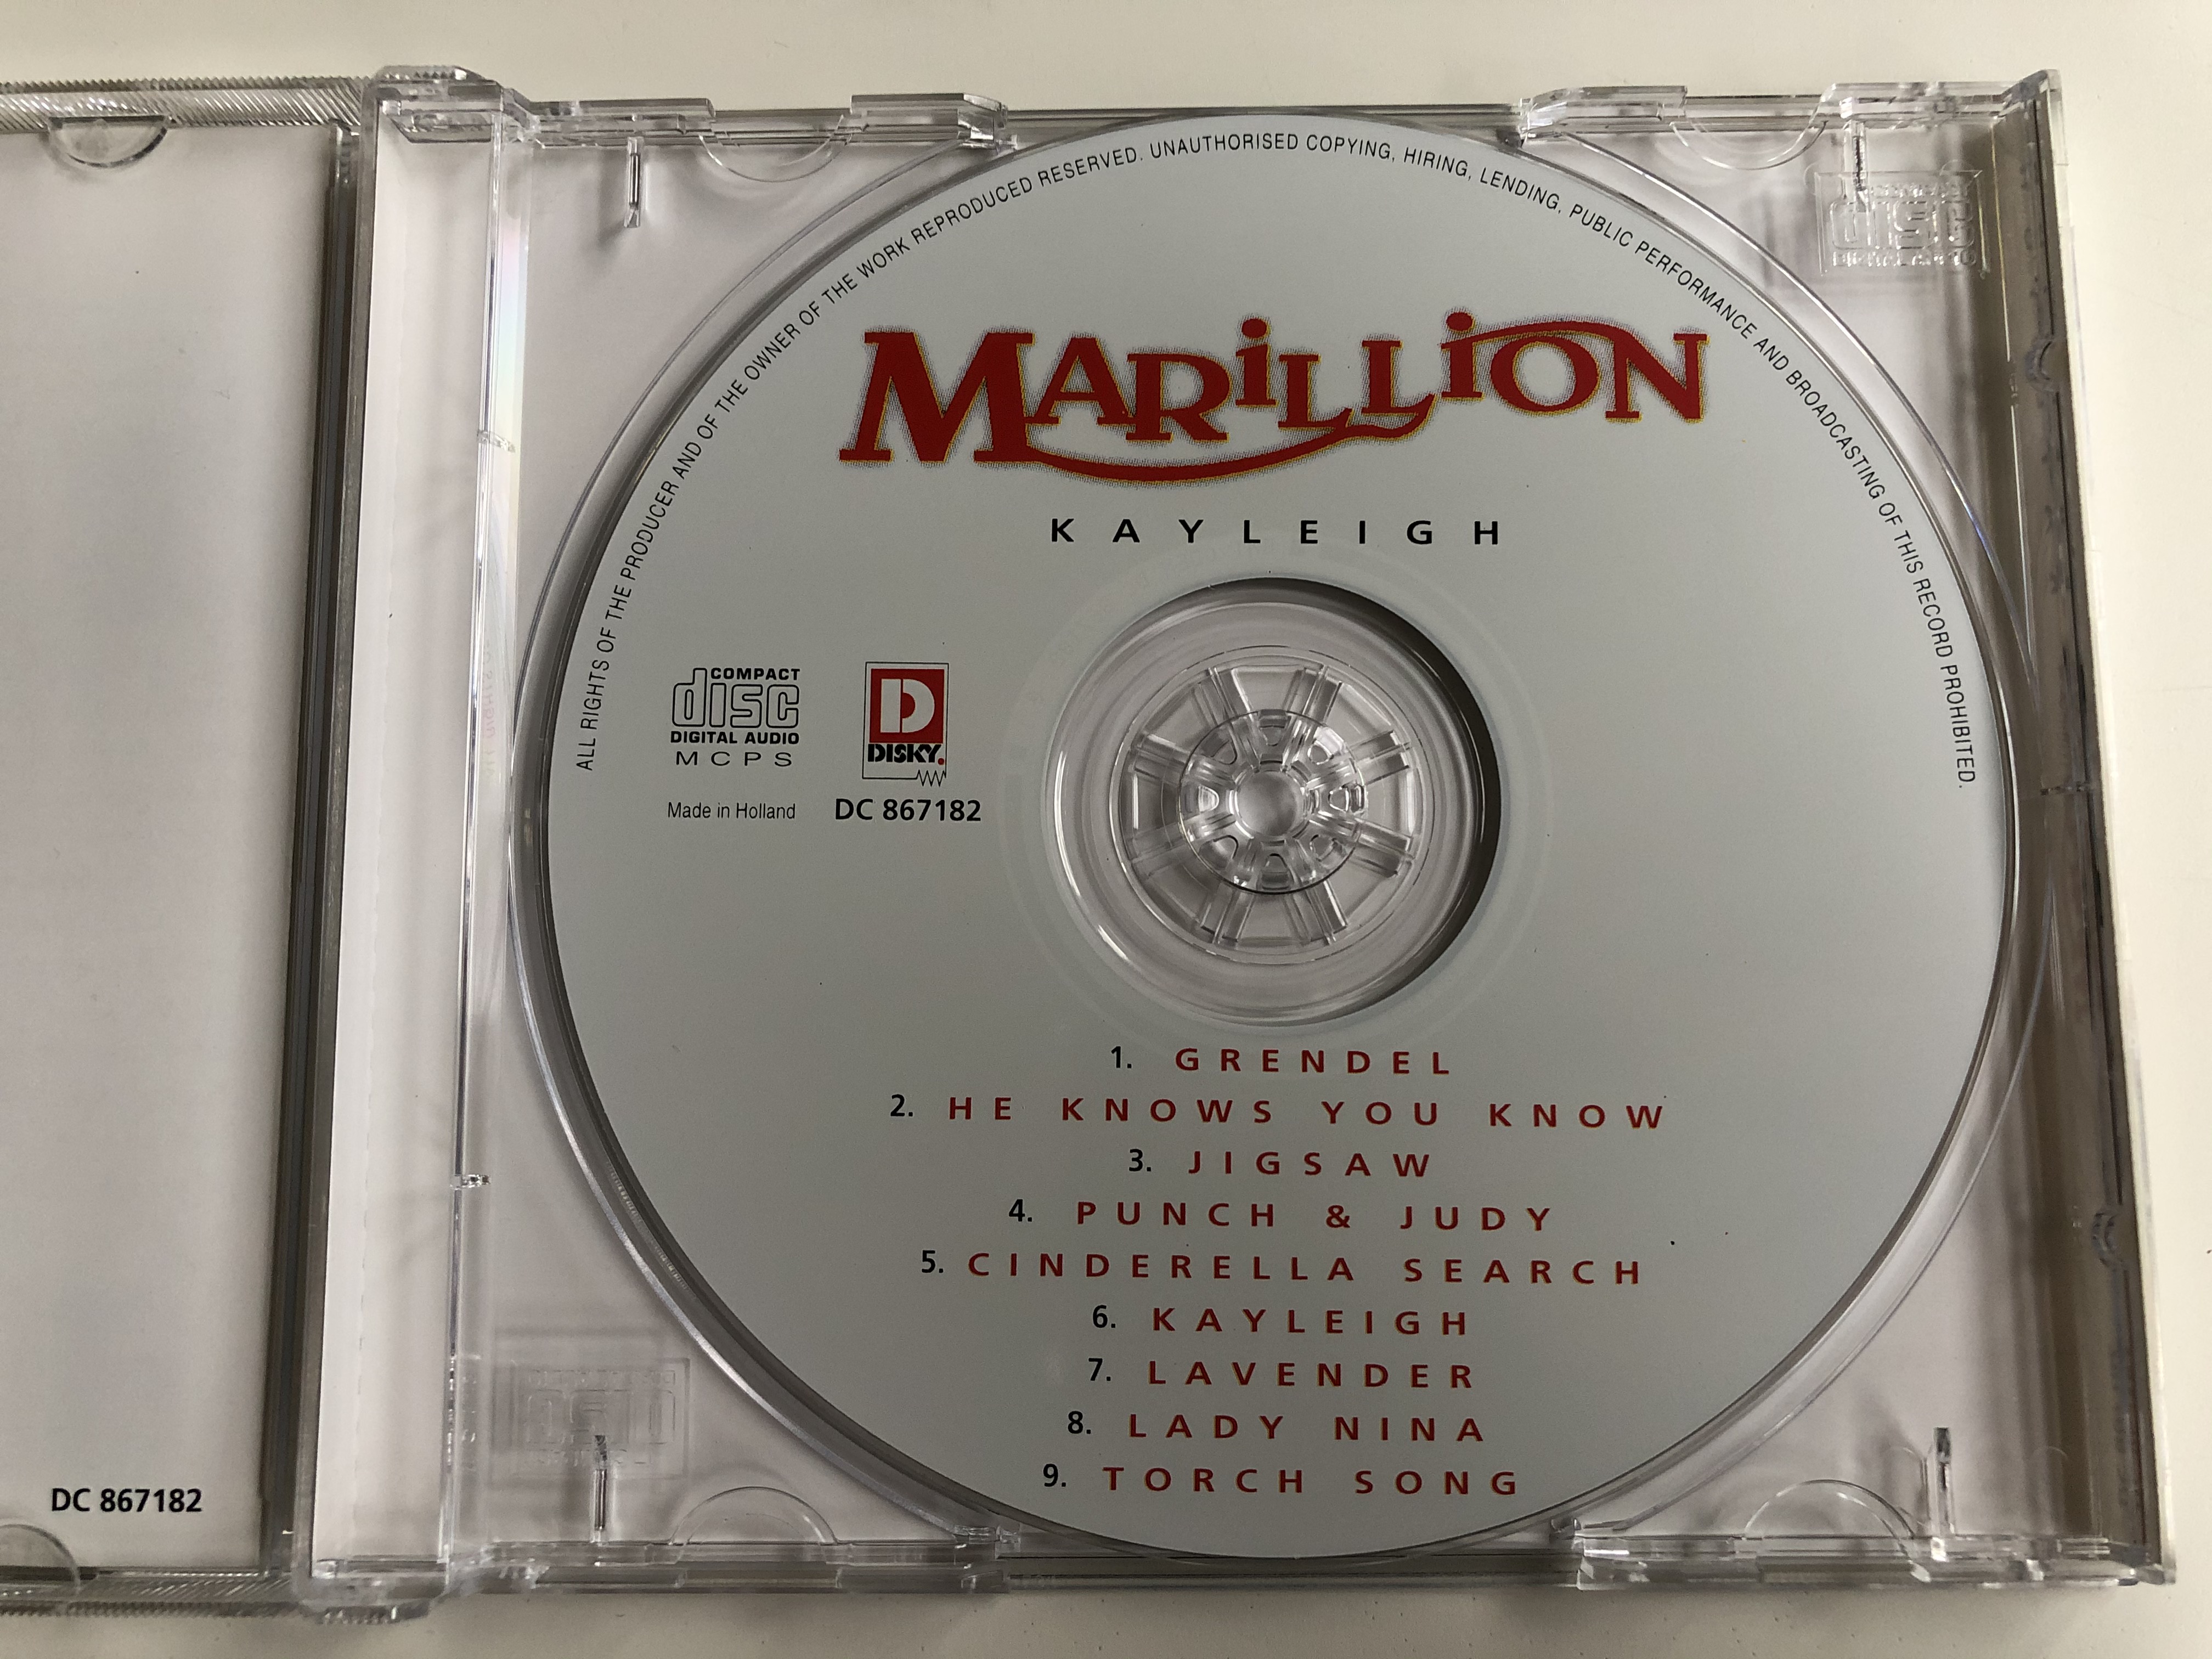 marillion-kayleigh-he-knows-you-know-punch-judy-lavender-torch-song-disky-audio-cd-1996-dc-867182-3-.jpg